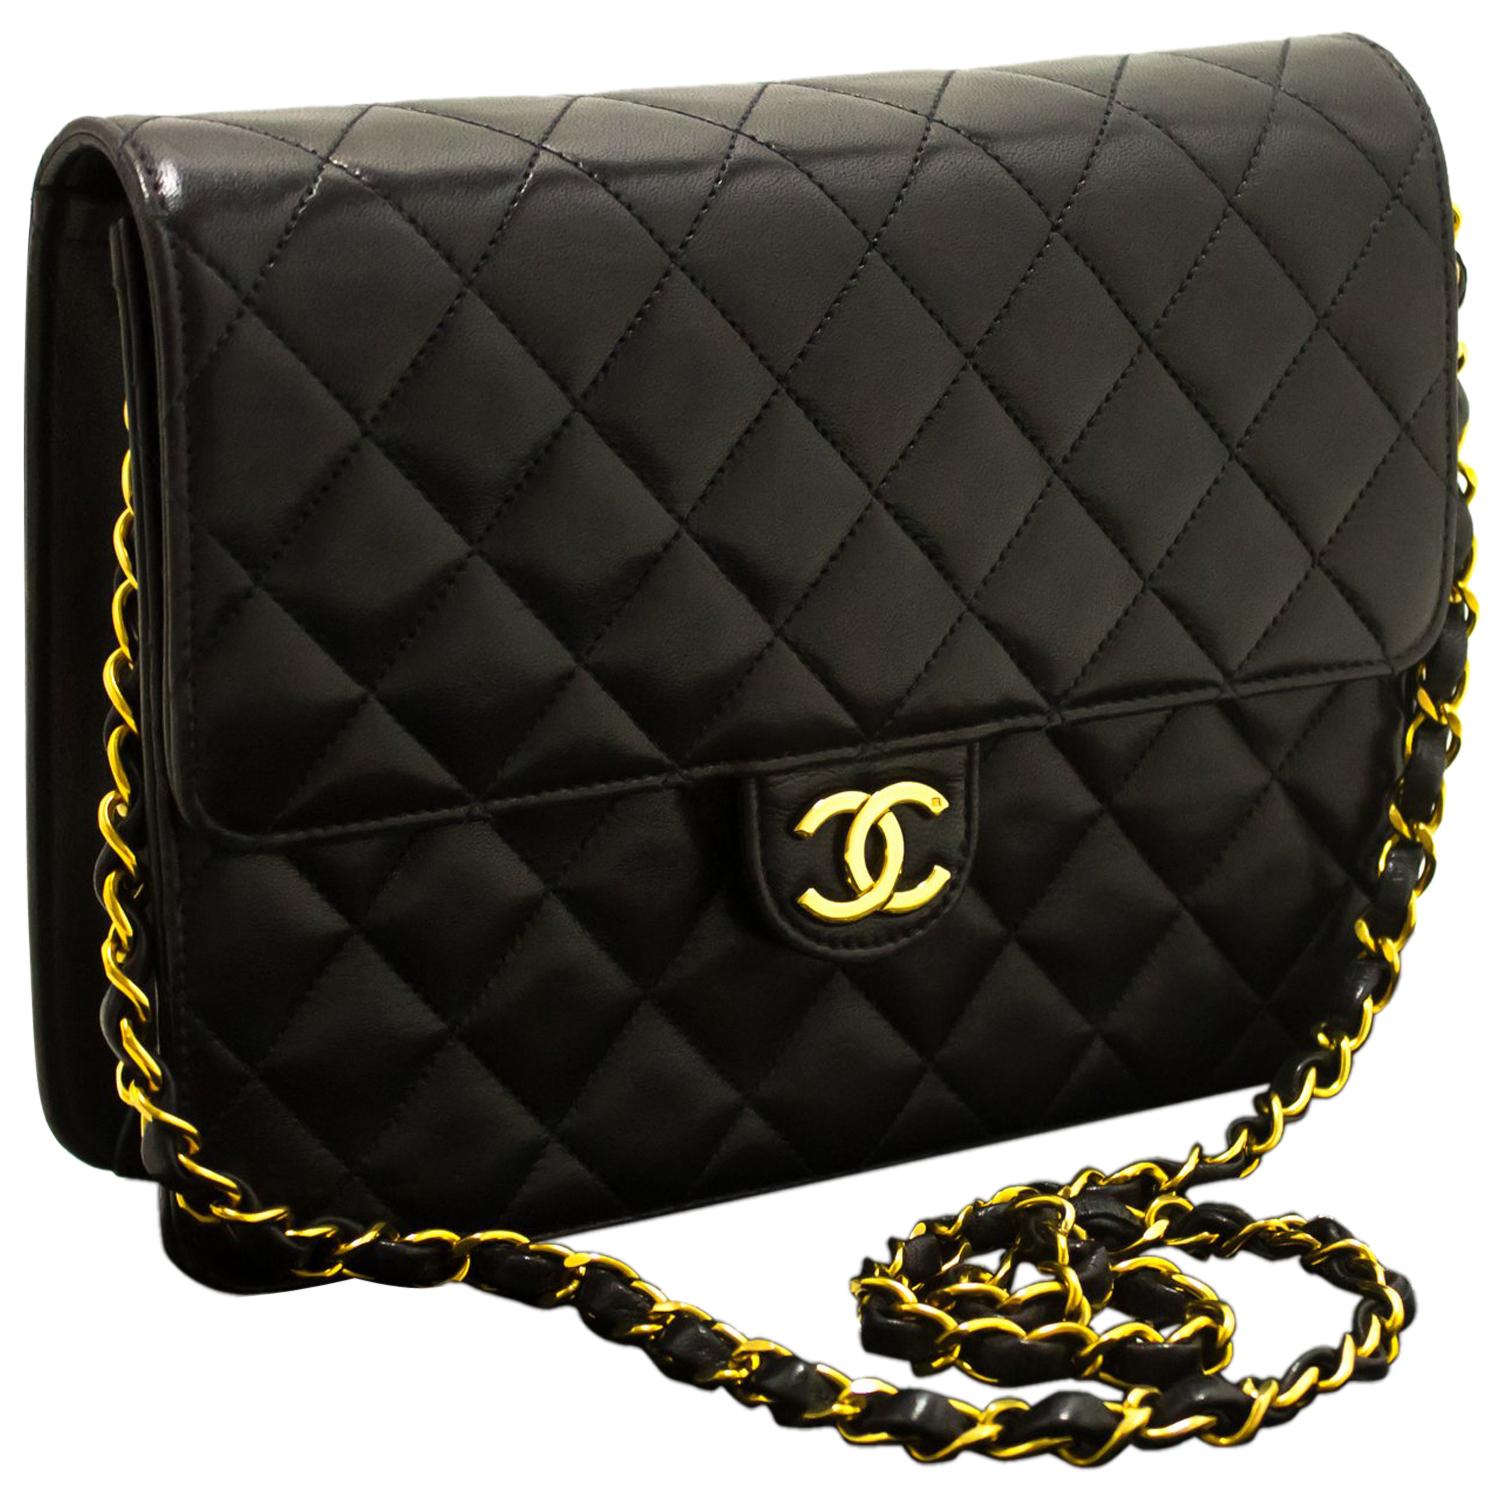 Chanel Chain Black Quilted Flap Lambskin Purse Shoulder Bag Clutch 